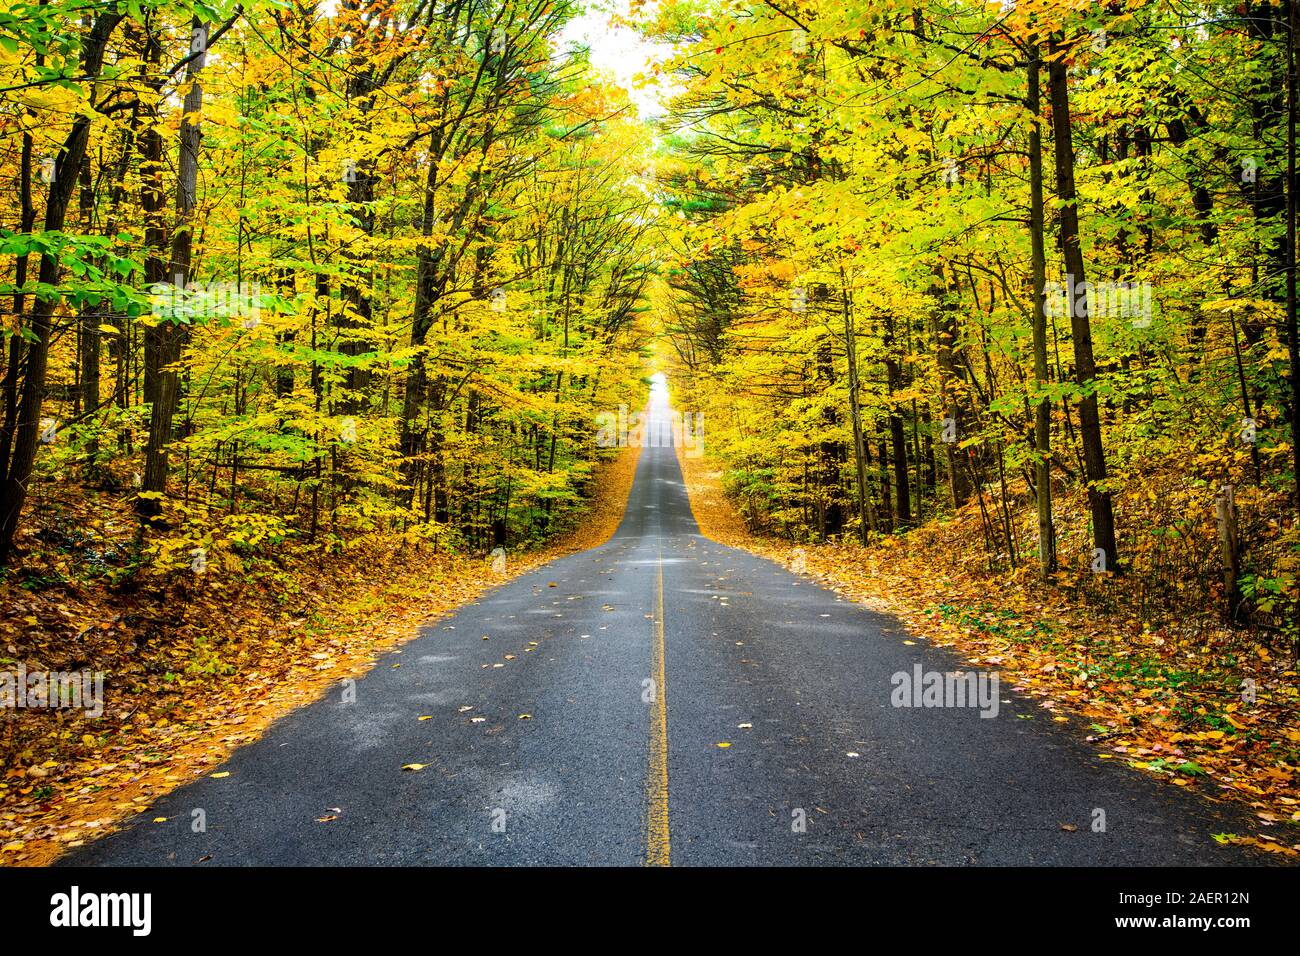 Park road vanishing into the autumn forest Stock Photo